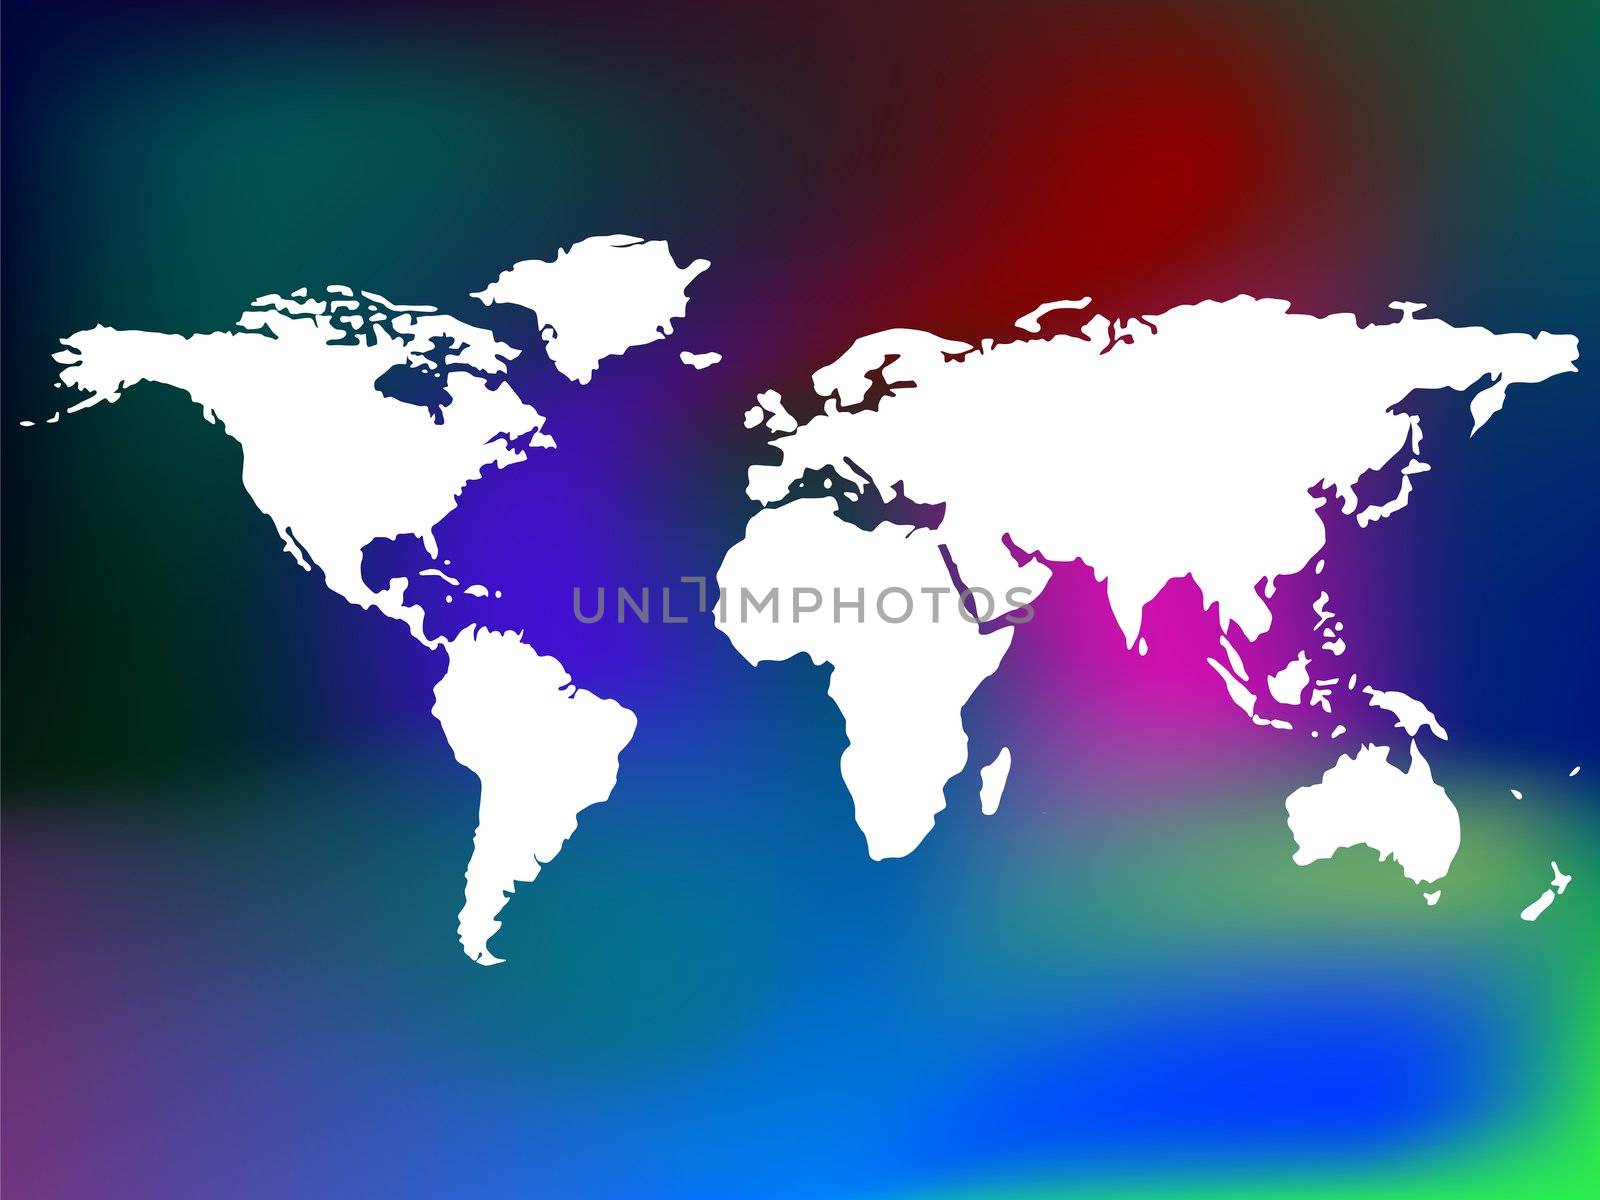 unique abstract background and world map by robertosch